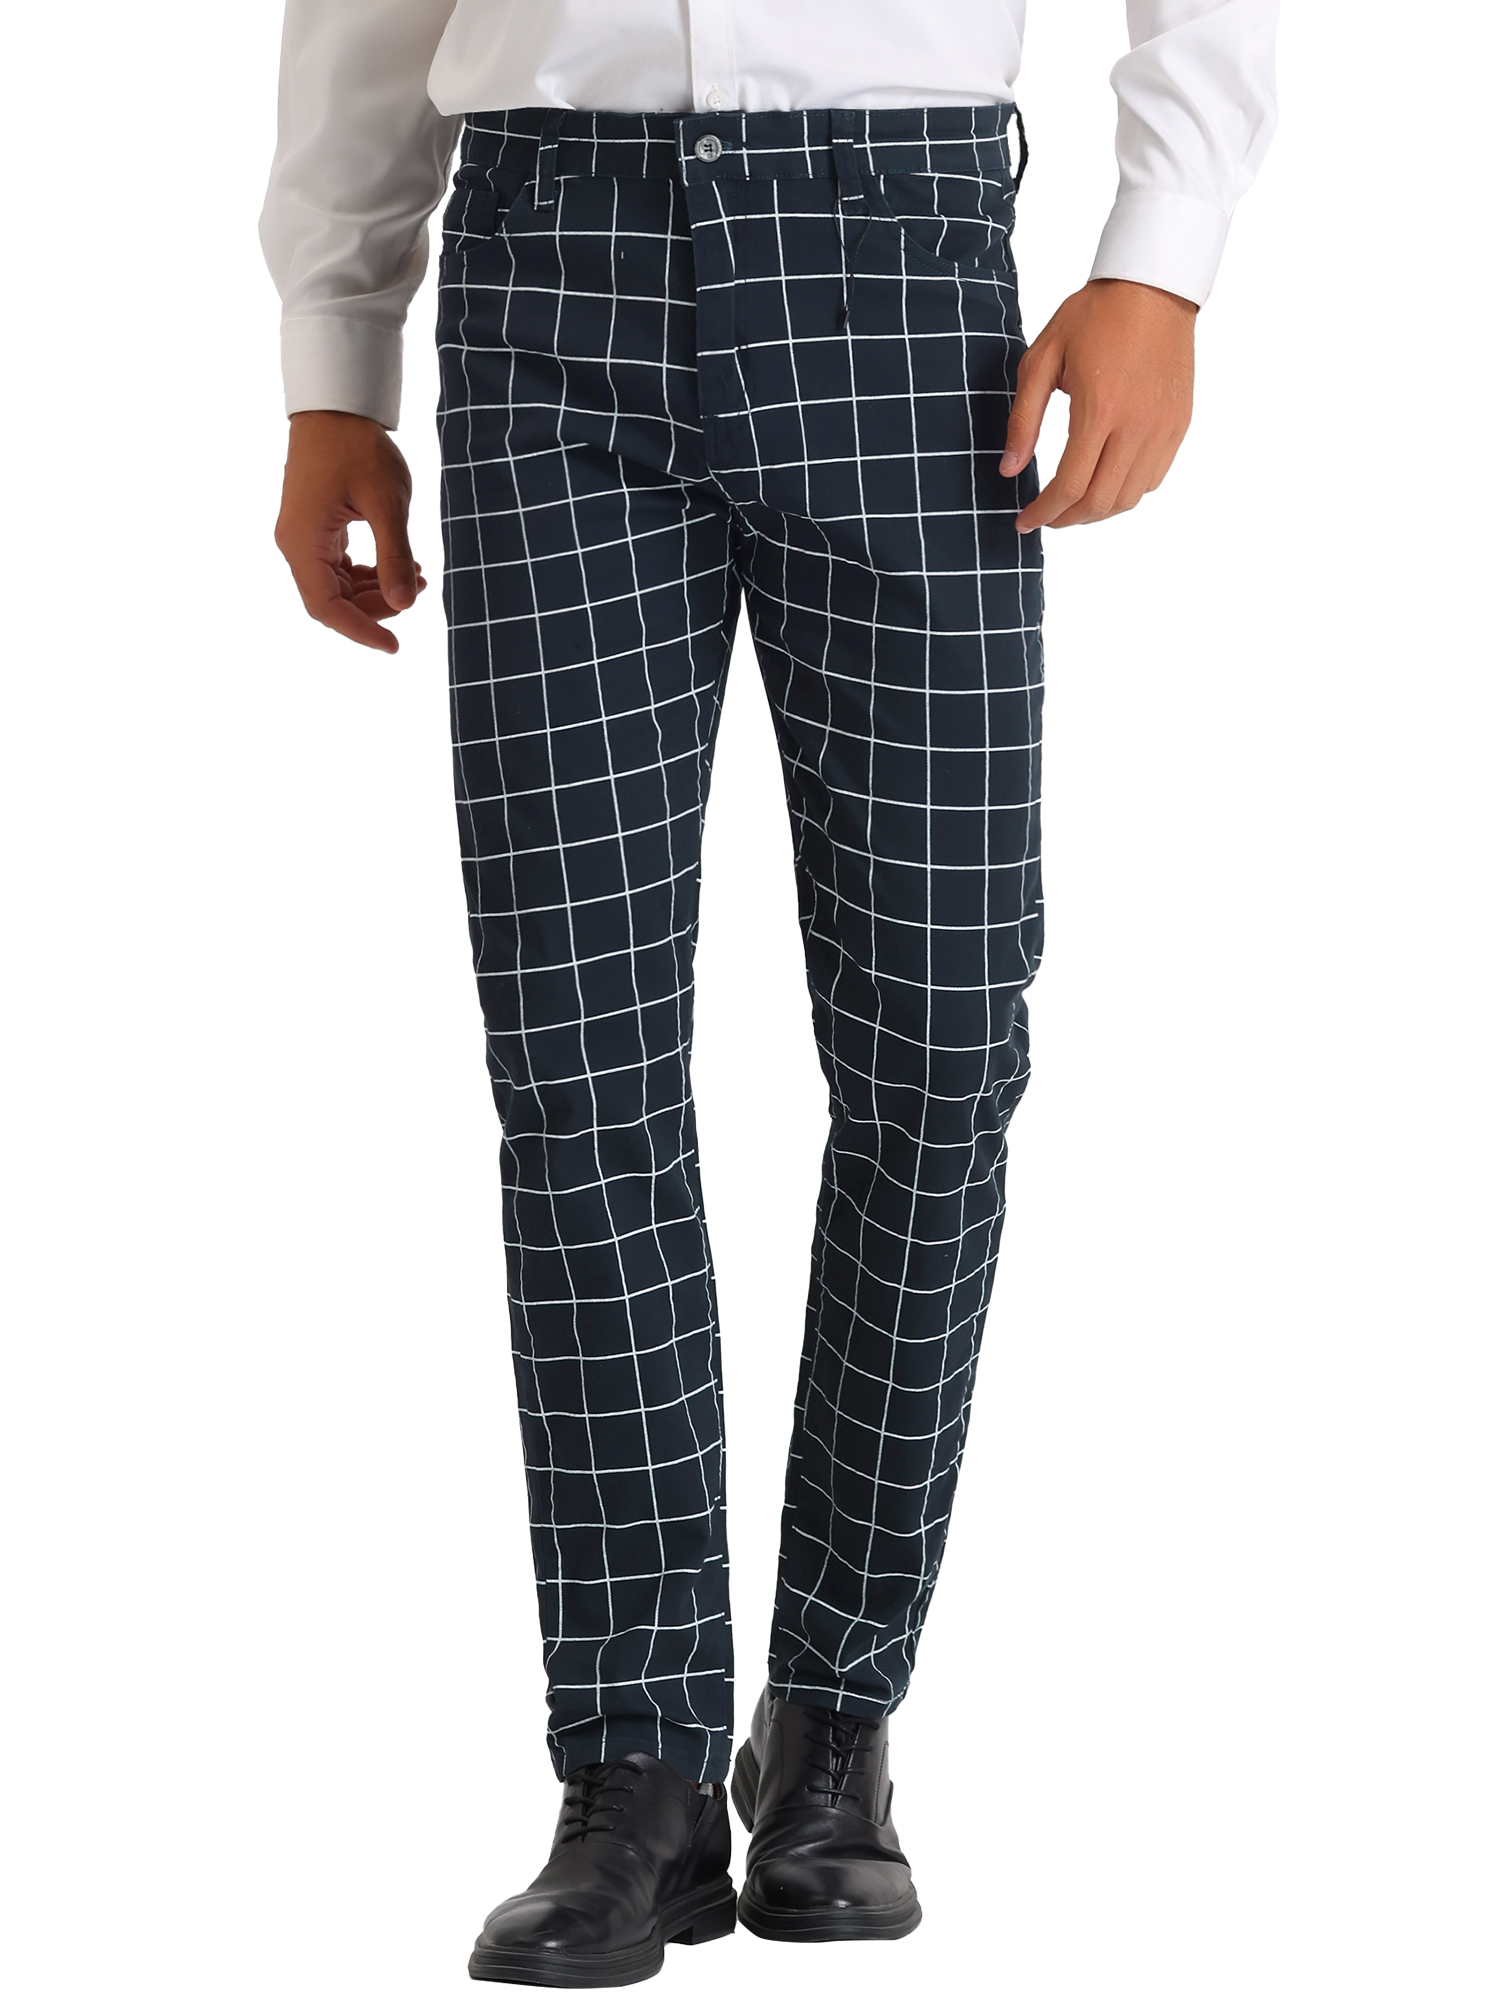 Mens Leisure Trousers Wedding Workwear Breathable Business Checked Formal  Pants | eBay